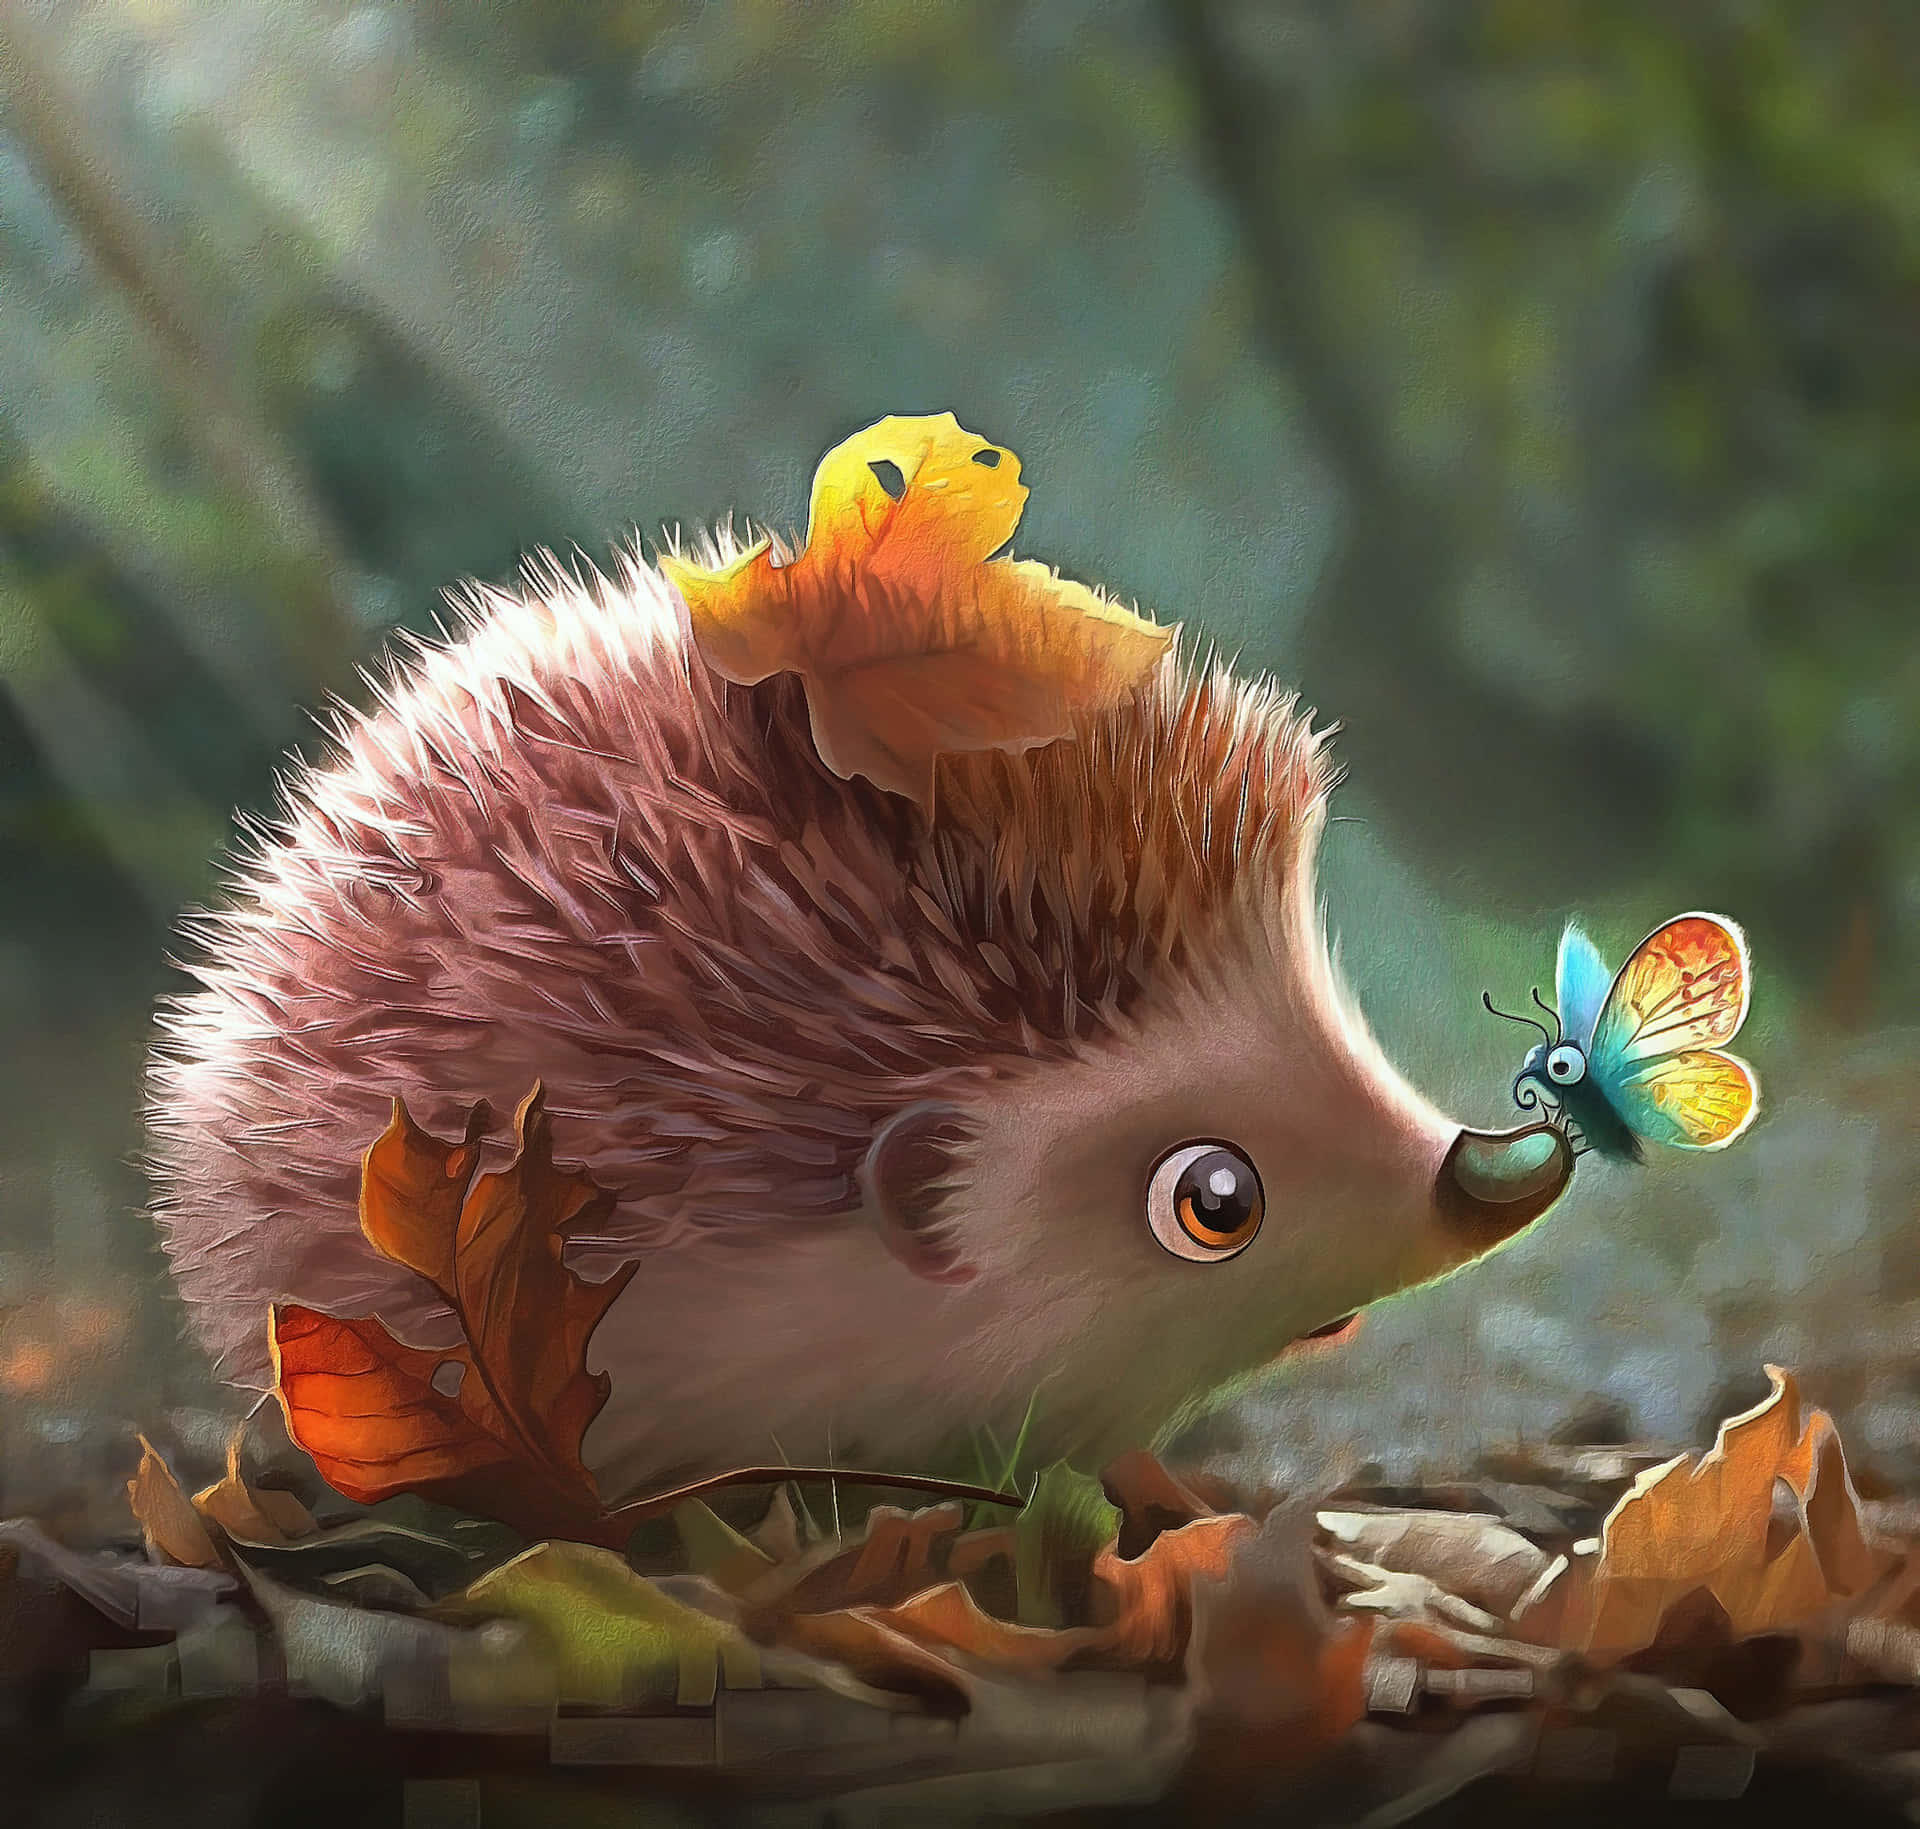 Cute Hedgehog Digital Art With Leaves And Butterfly Picture